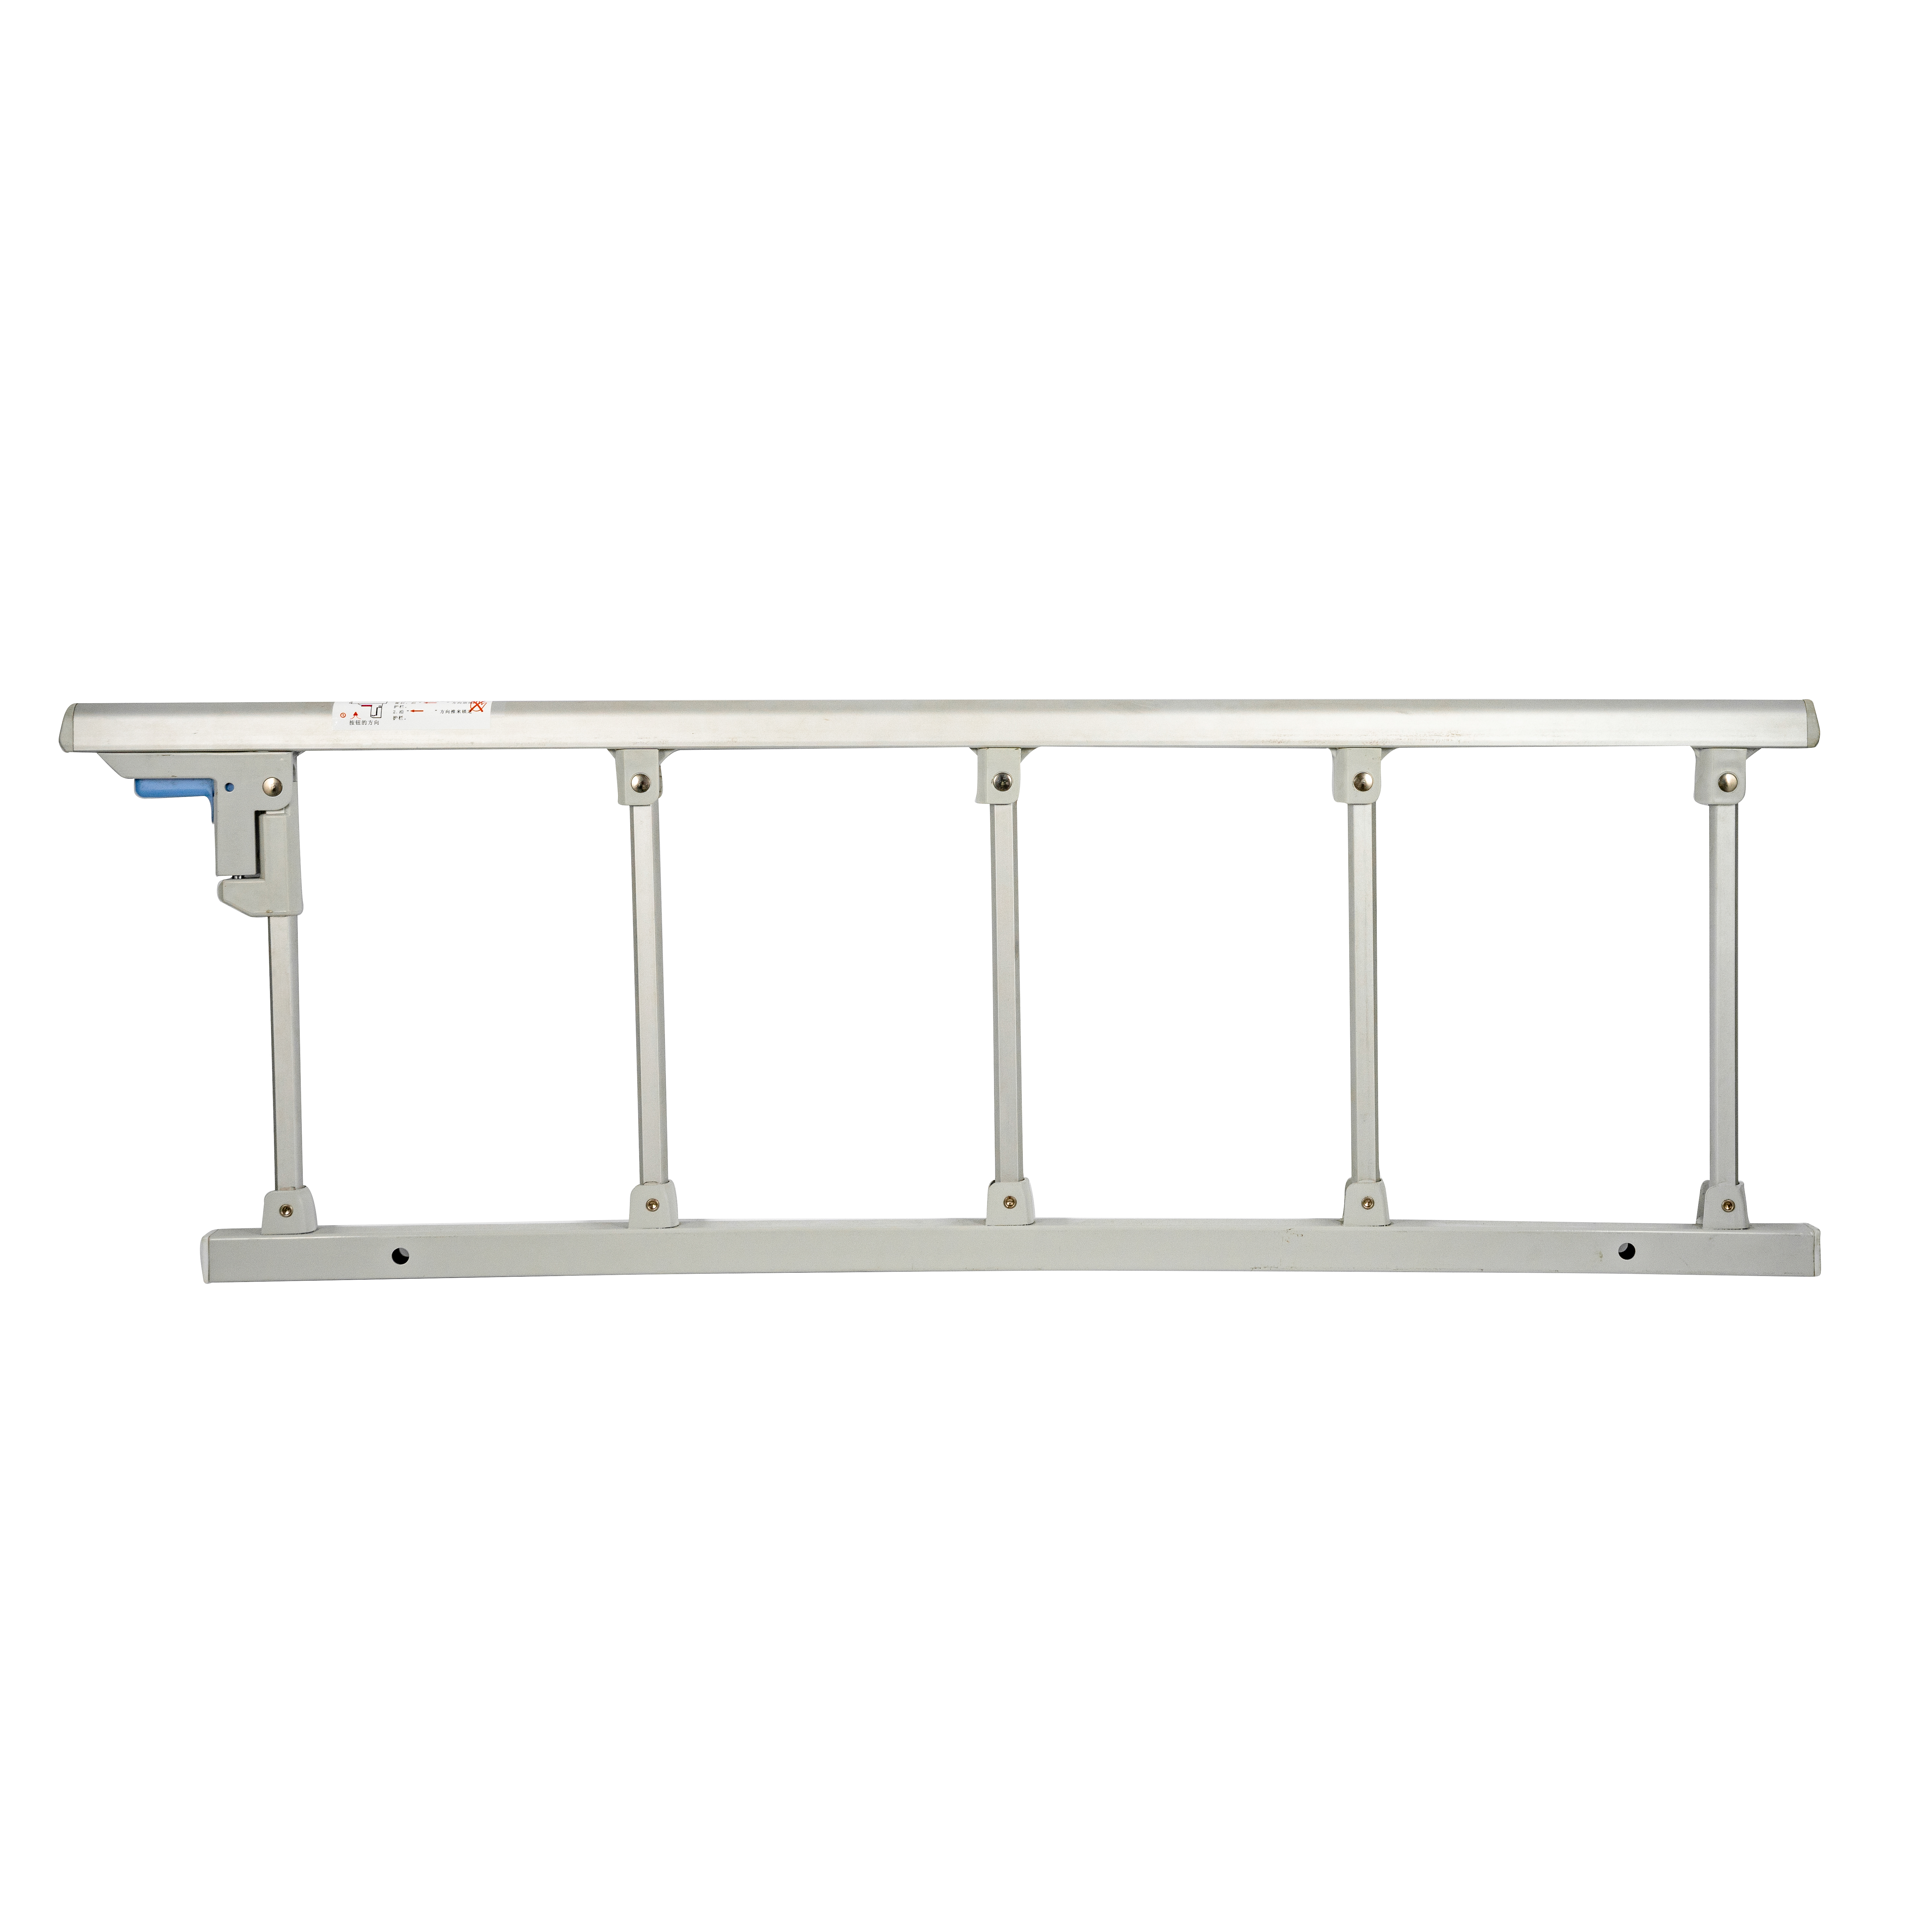 Folding or Collapsible Side Rail for Hospital Bed Aluminum or Alloy or Stainless Steel or Painted Steel Featured Image